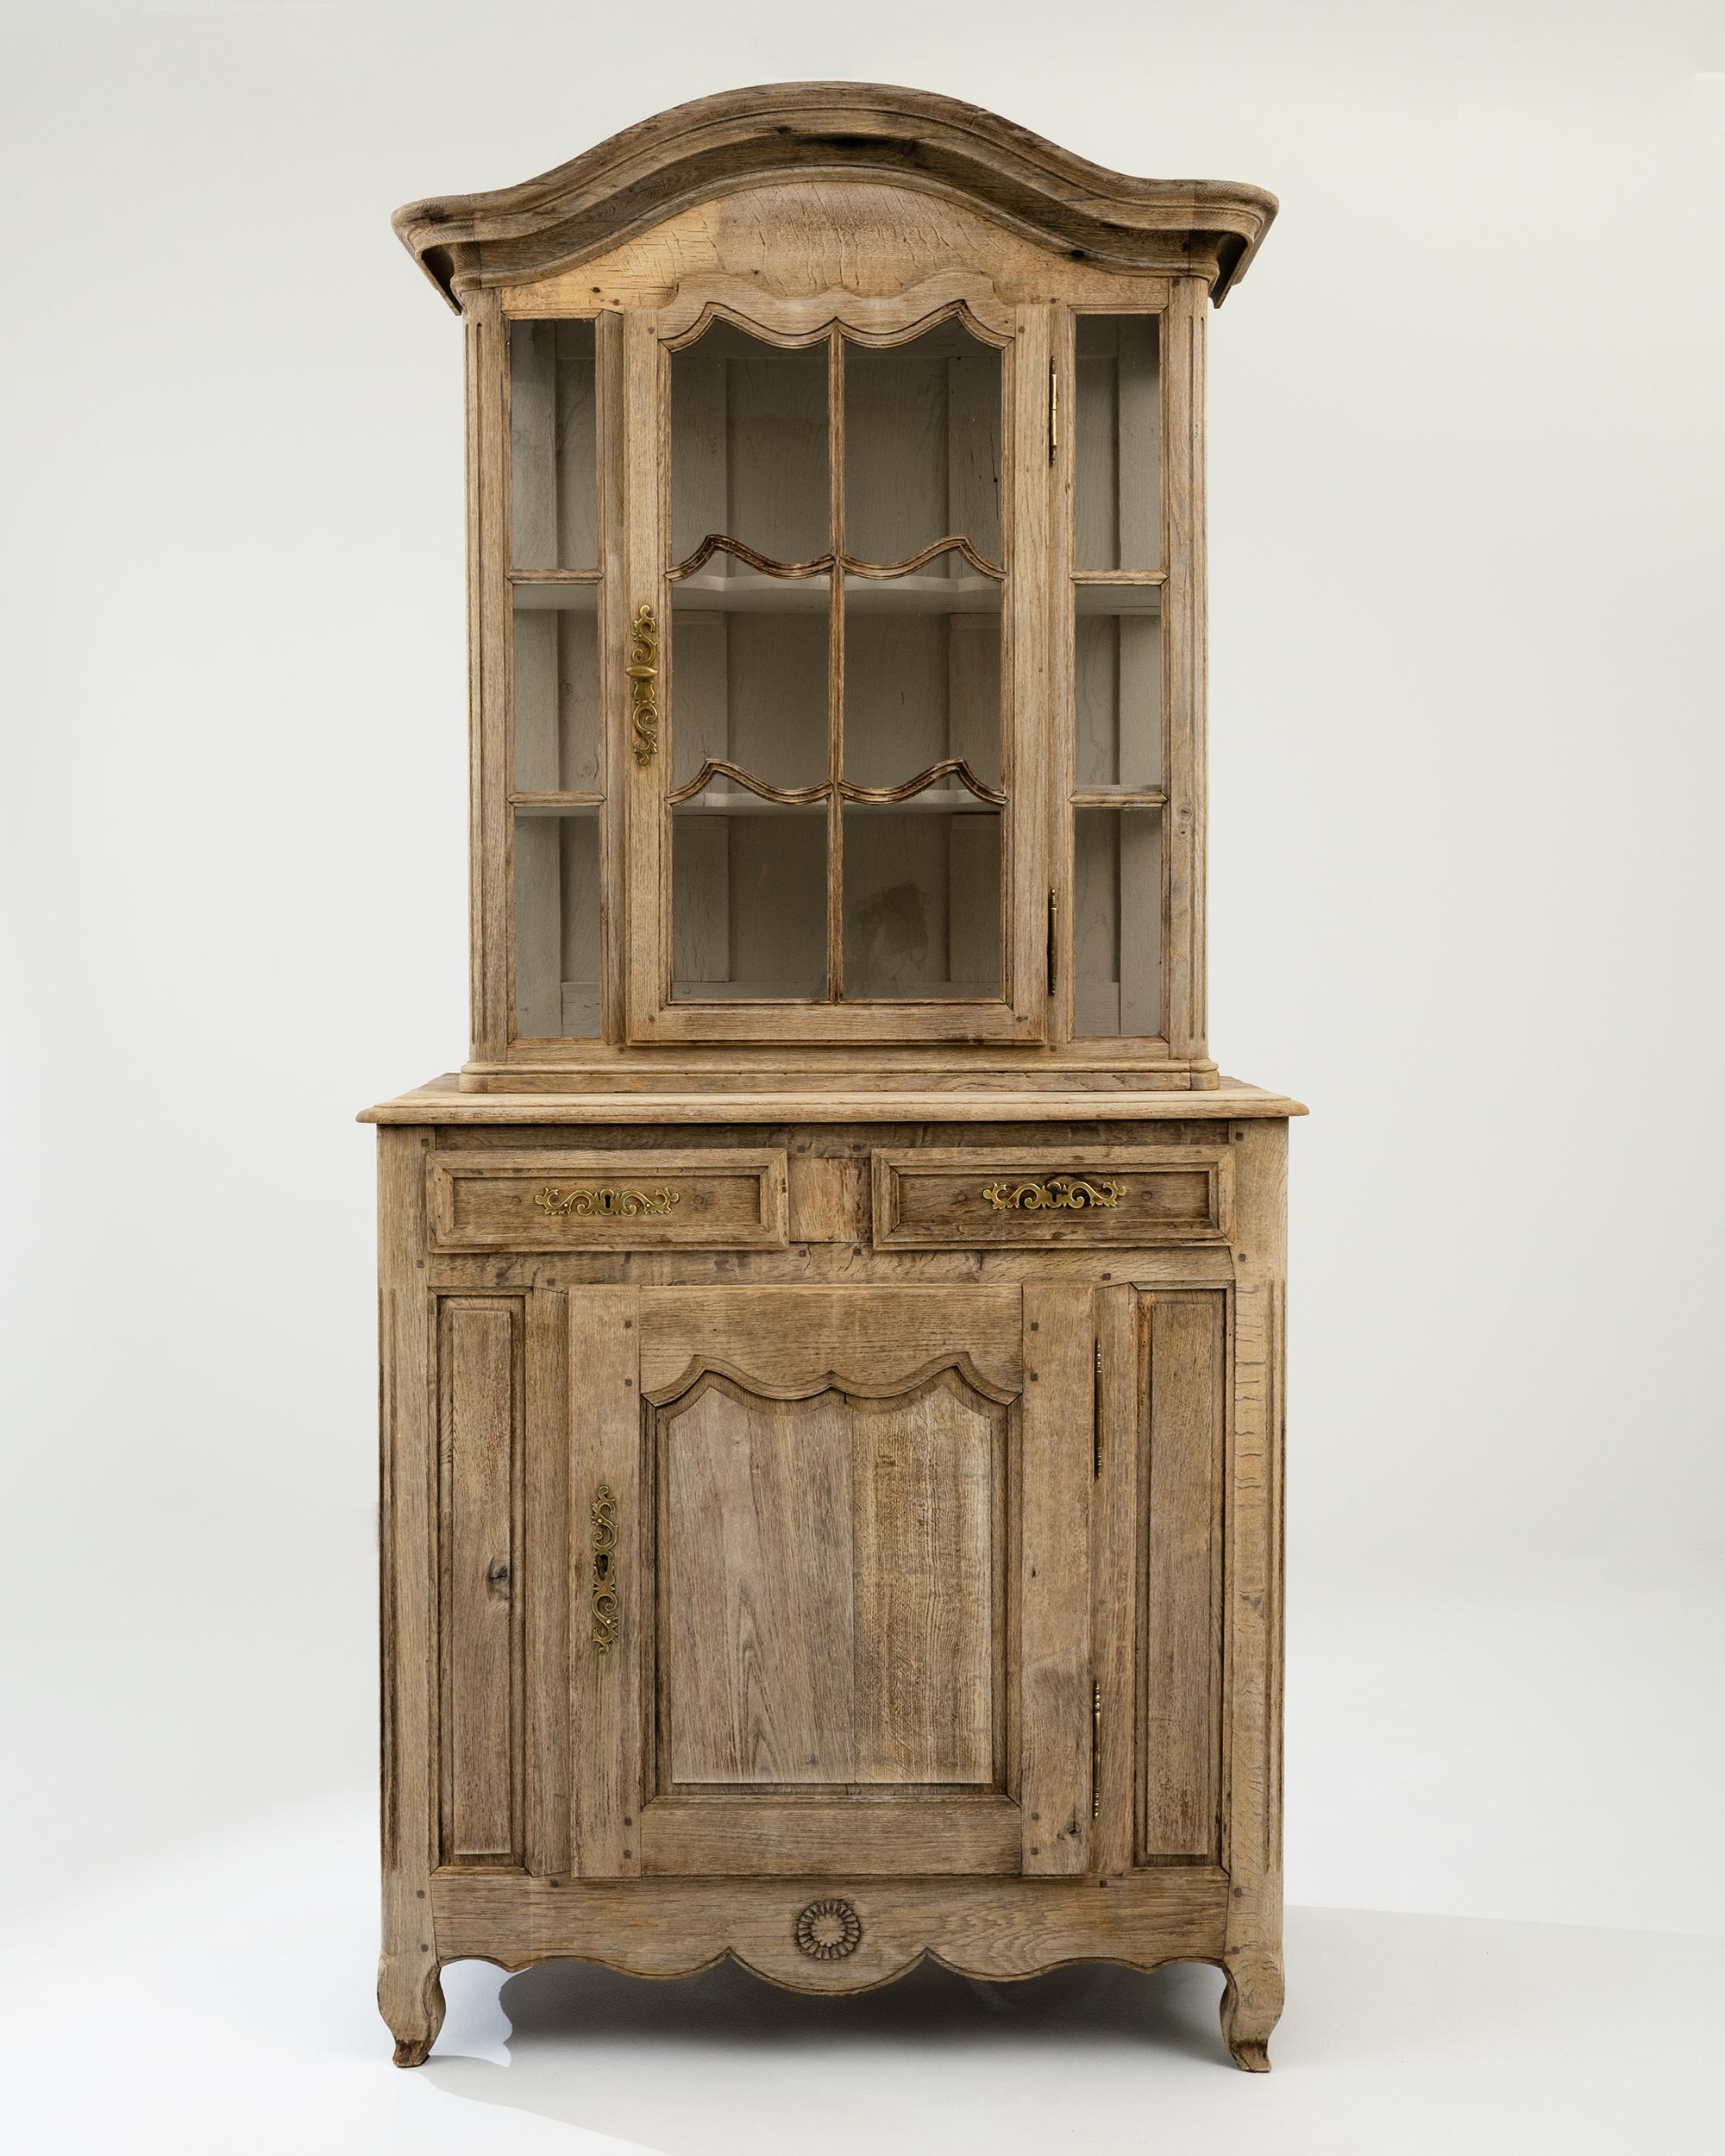 A graceful design in natural oak gives this antique French Provincial vitrine a timeless charm. Hand-crafted in the 1800s, elegant mullions mirror the flowing shape of the paneling on the doors of the upper window and lower cupboard to create a